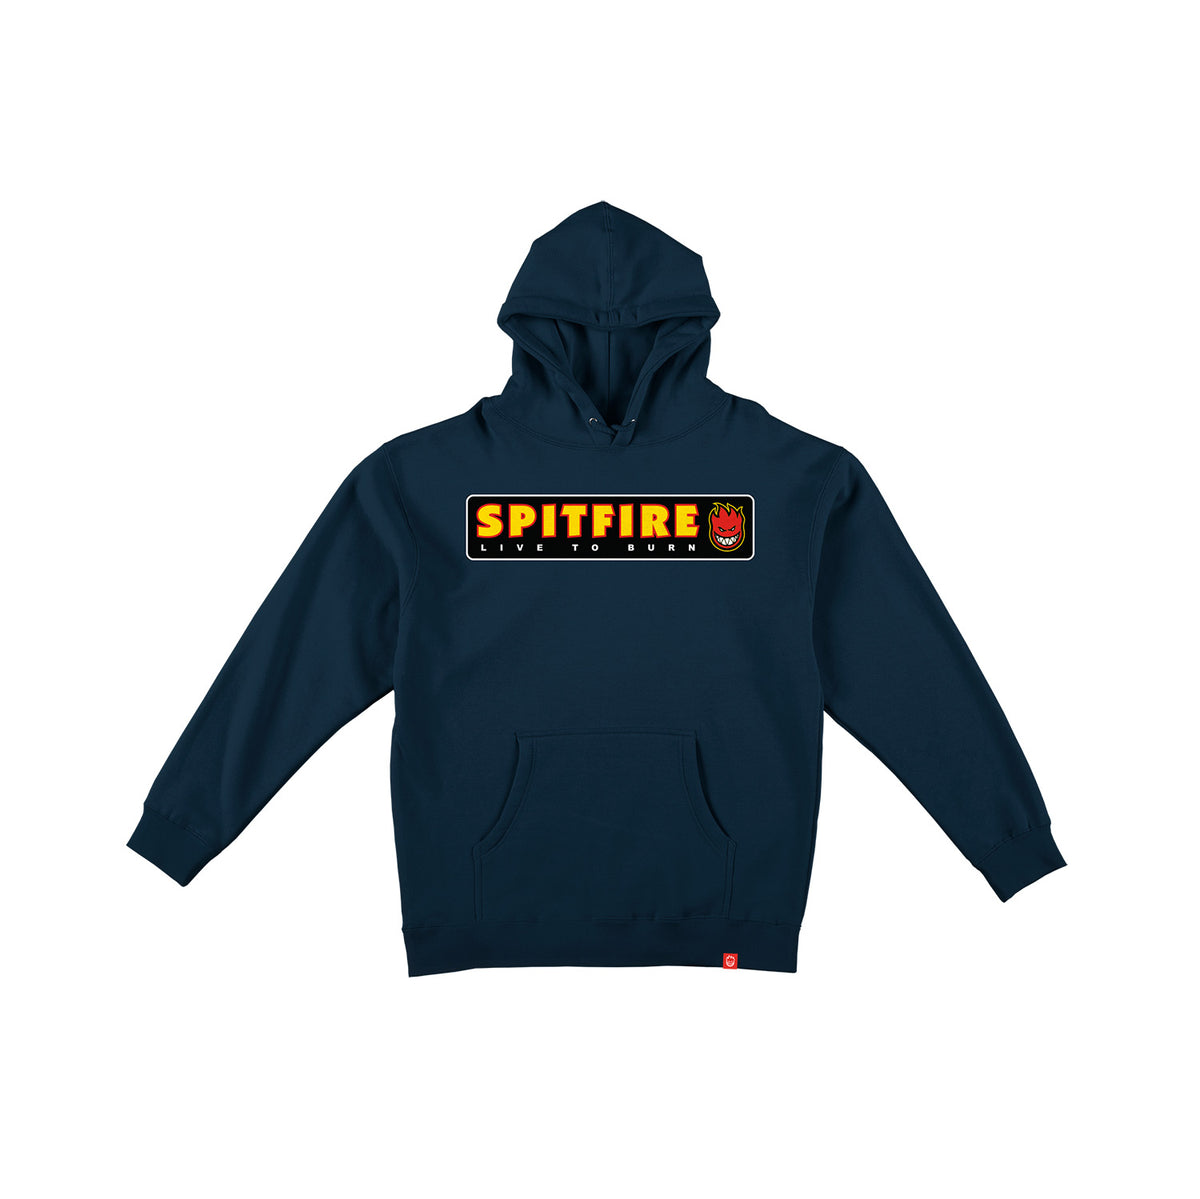 Spitfire Live To Burn Youth Hooded Sweatshirt